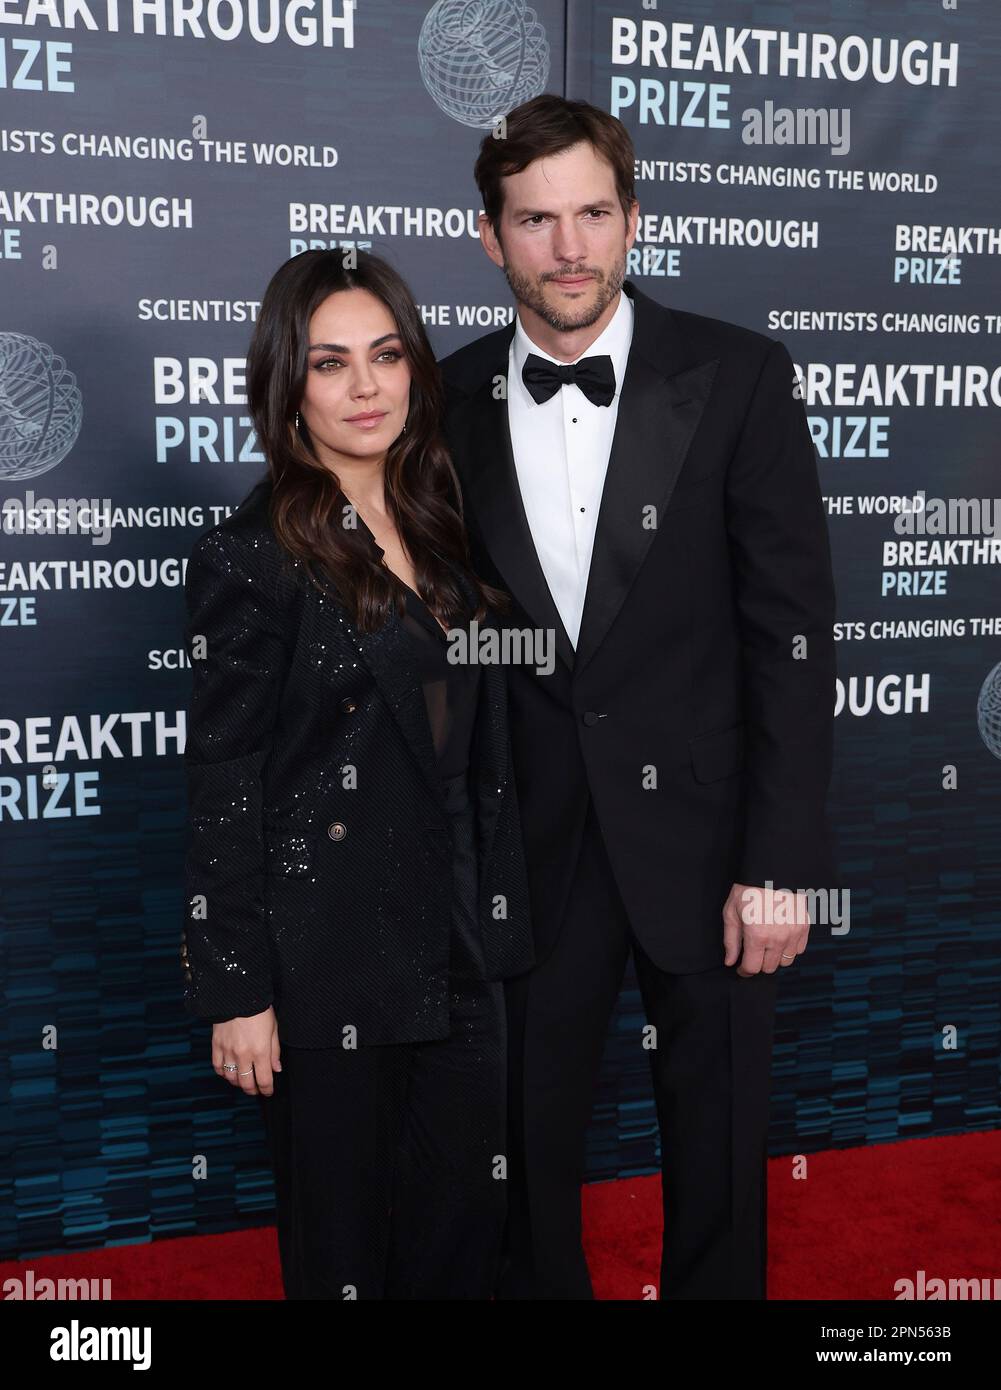 Los Angeles, USA. 15th Apr, 2023. Mila Kunis and Ashton Kutcher attend the 9th Annual Breakthrough Prize Ceremony at the Academy Museum of Motion Pictures on April 15, 2023 in Los Angeles, California. Photo: CraSH/imageSPACE Credit: Imagespace/Alamy Live News Stock Photo